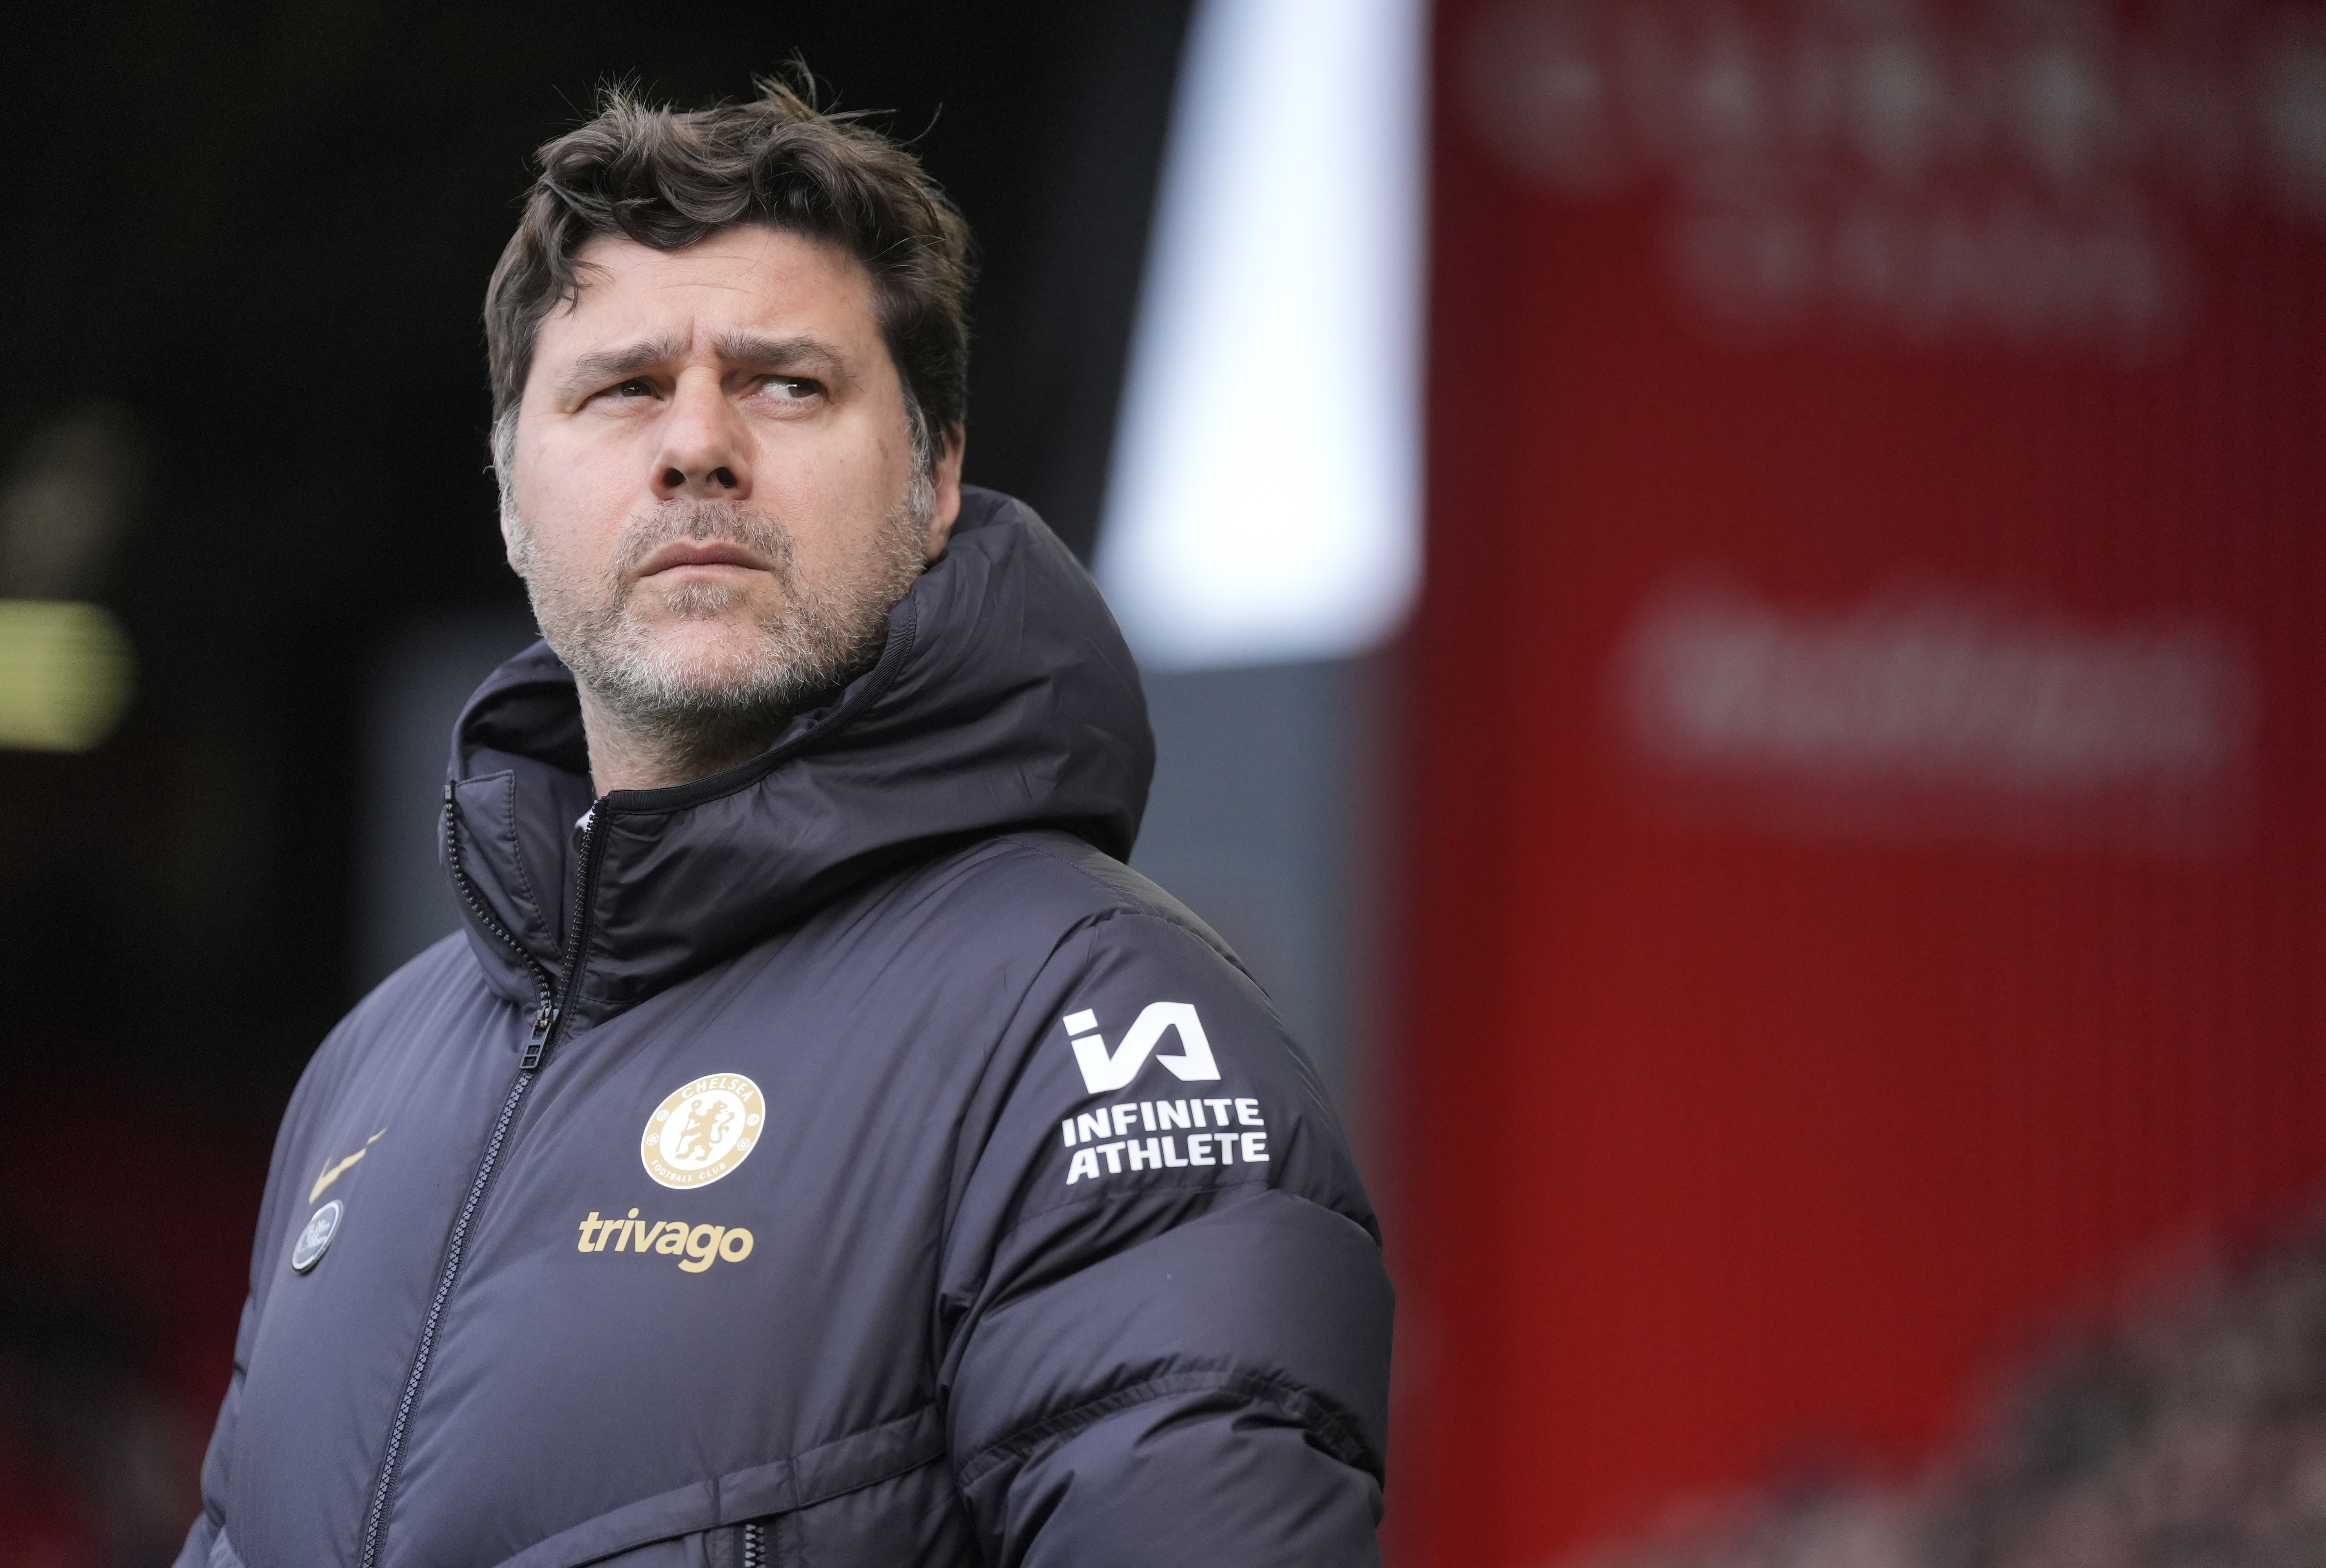 Mauricio Pochettino has hinted he could quit Chelsea